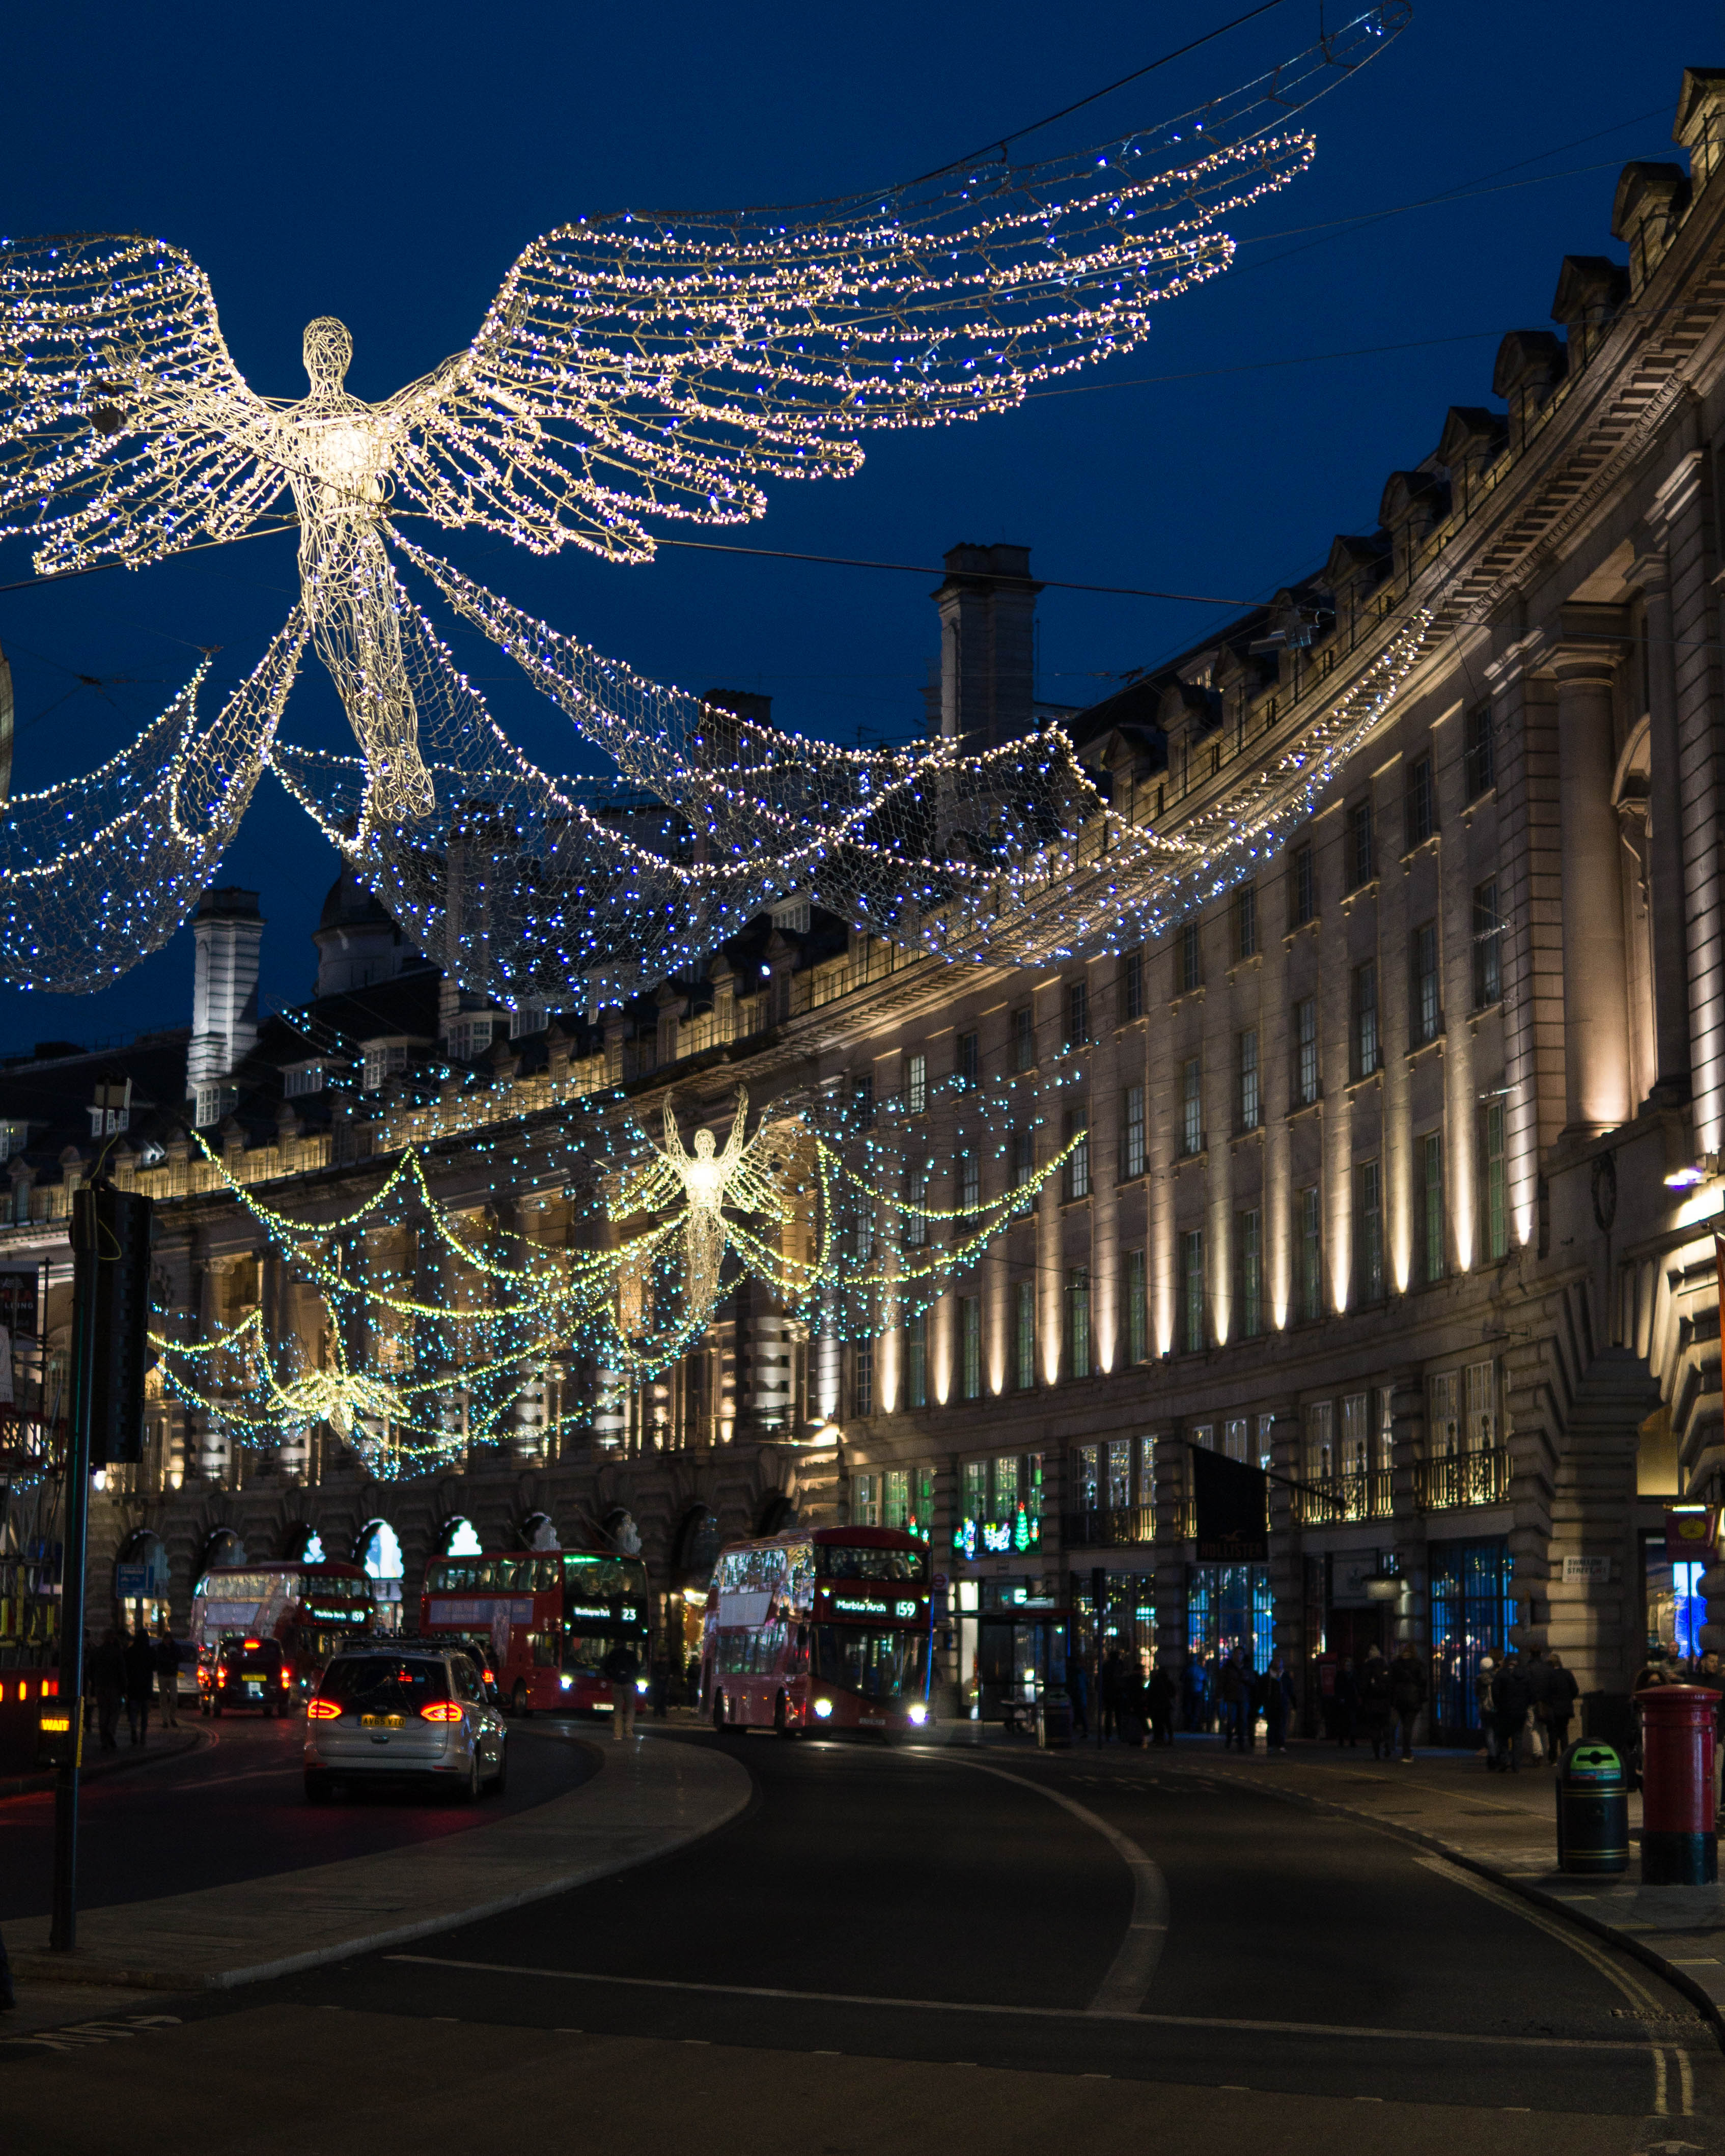 List 93+ Pictures Pictures Of London At Christmas Sharp